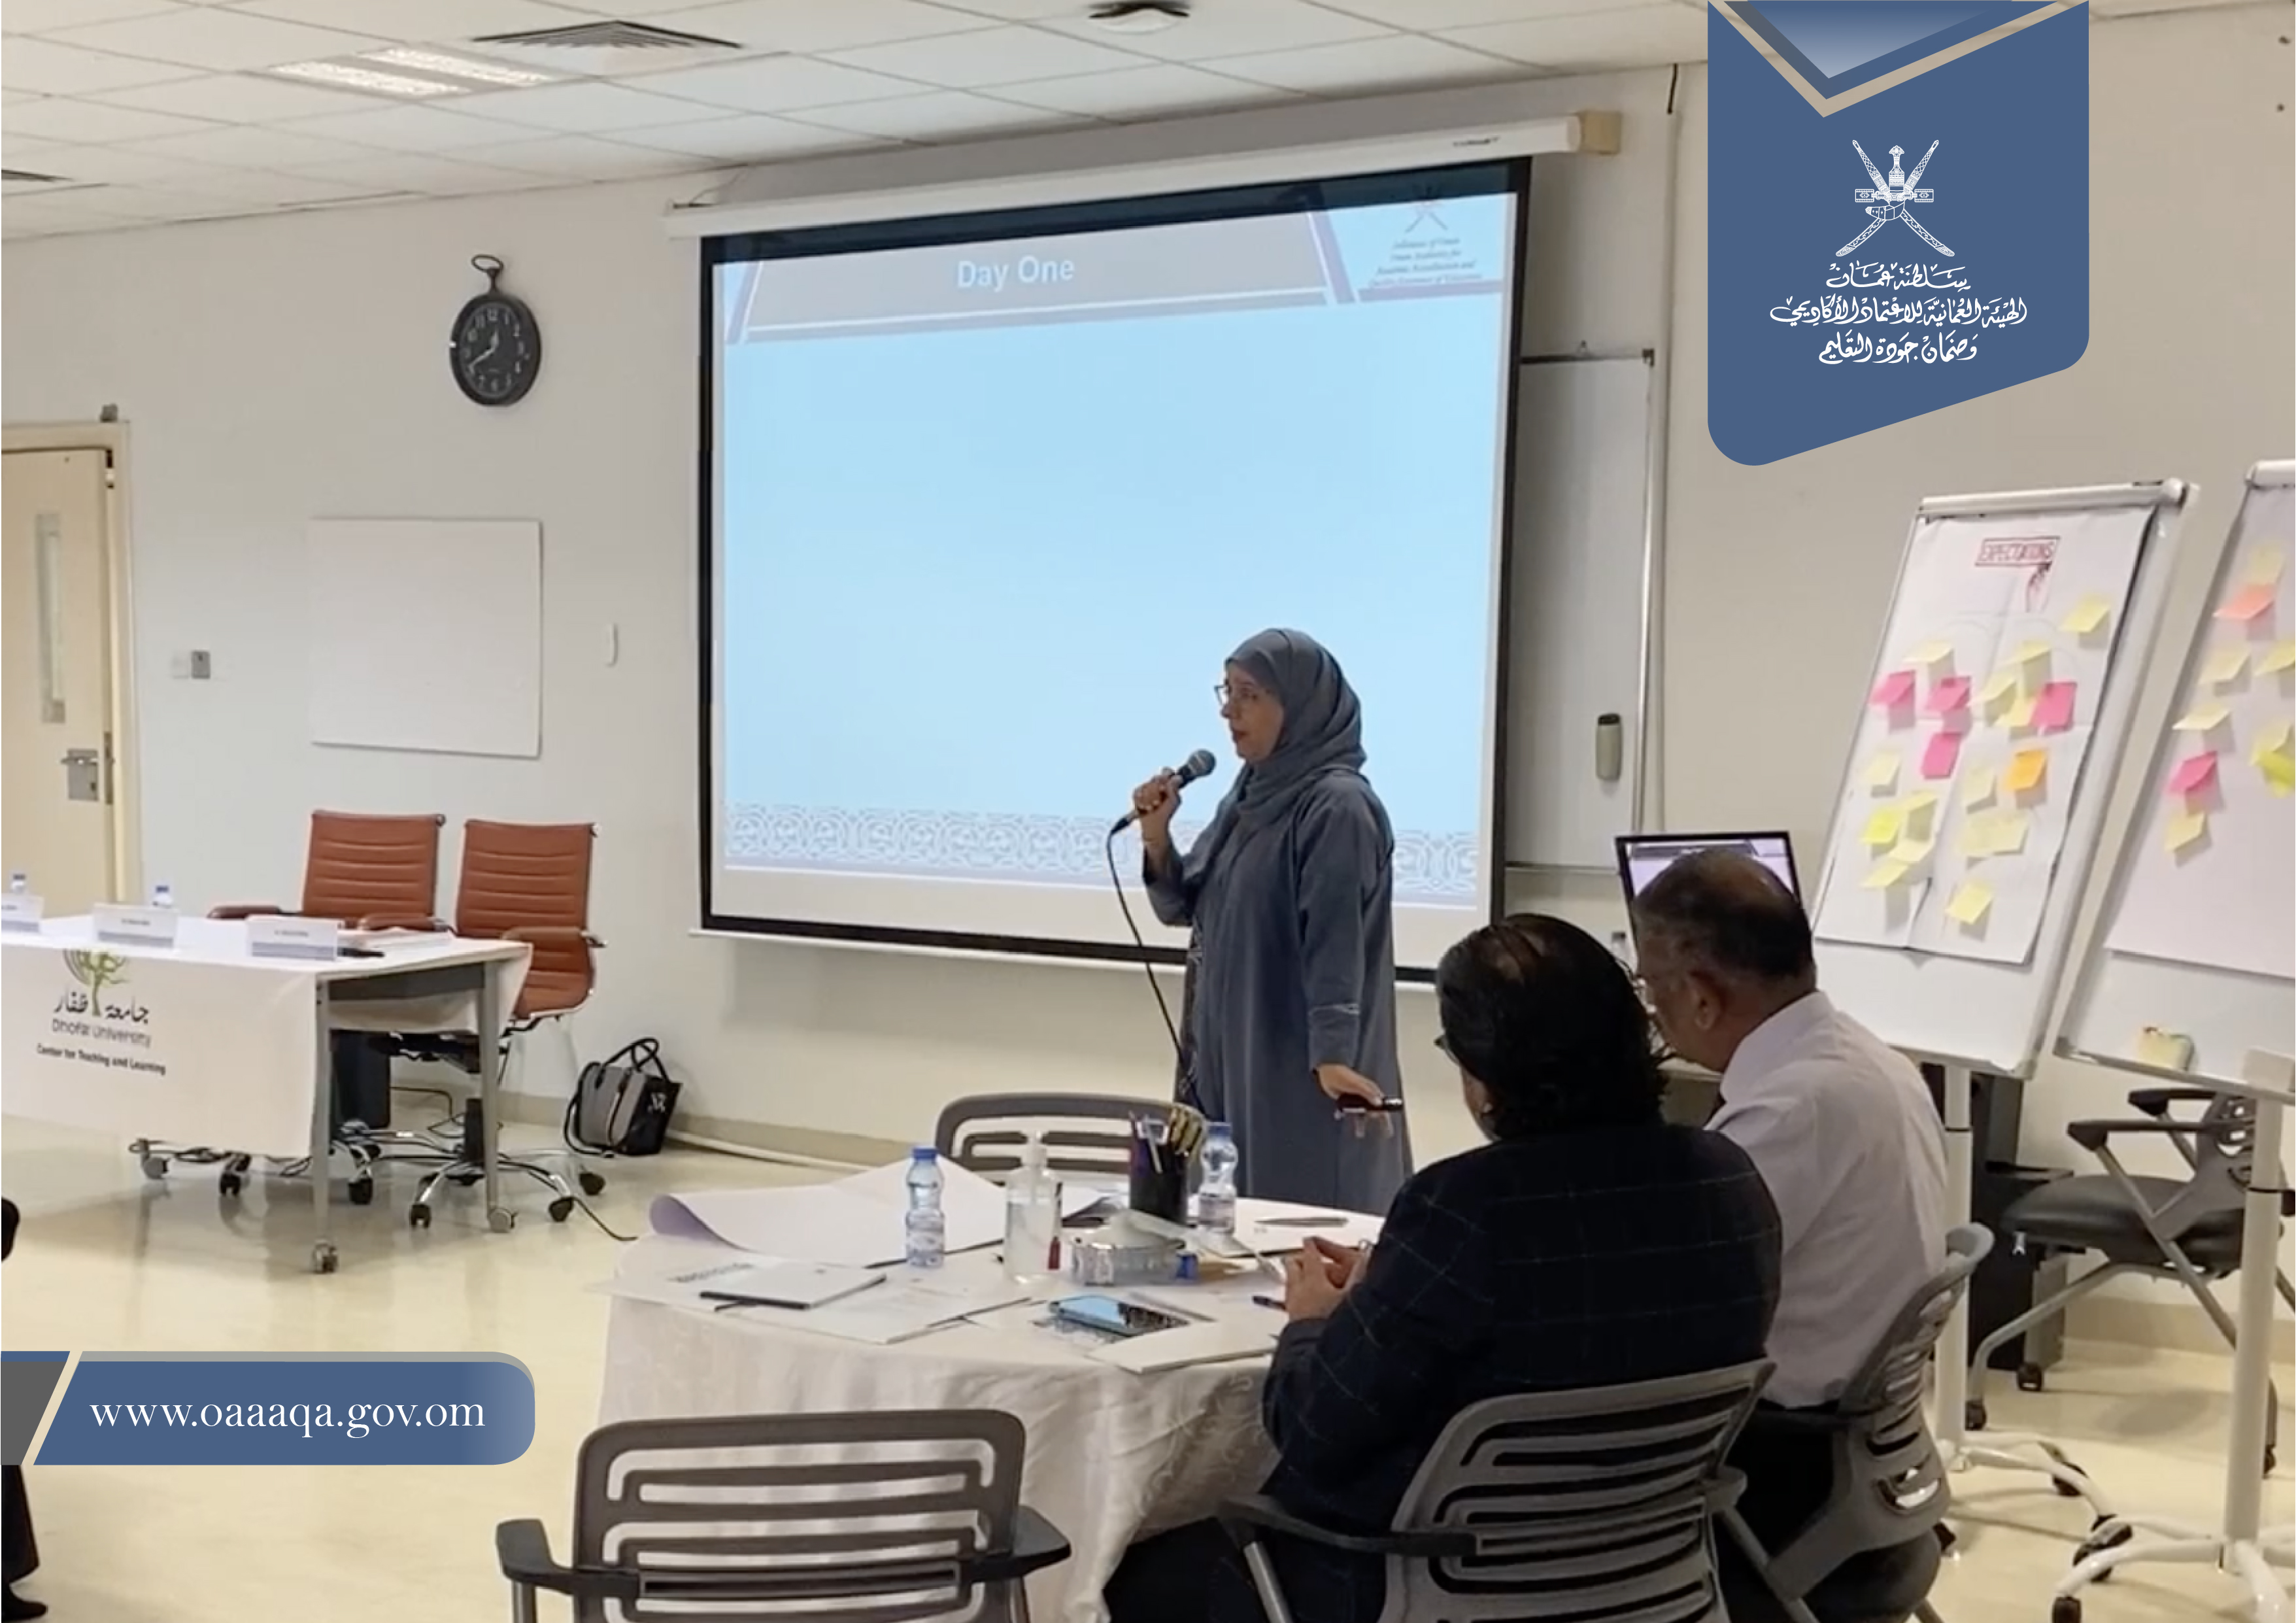 The Directorate General of the National Qualifications Framework held a Capacity Building workshop on Listing Qualifications on the Oman Qualifications Framework in Dhofar